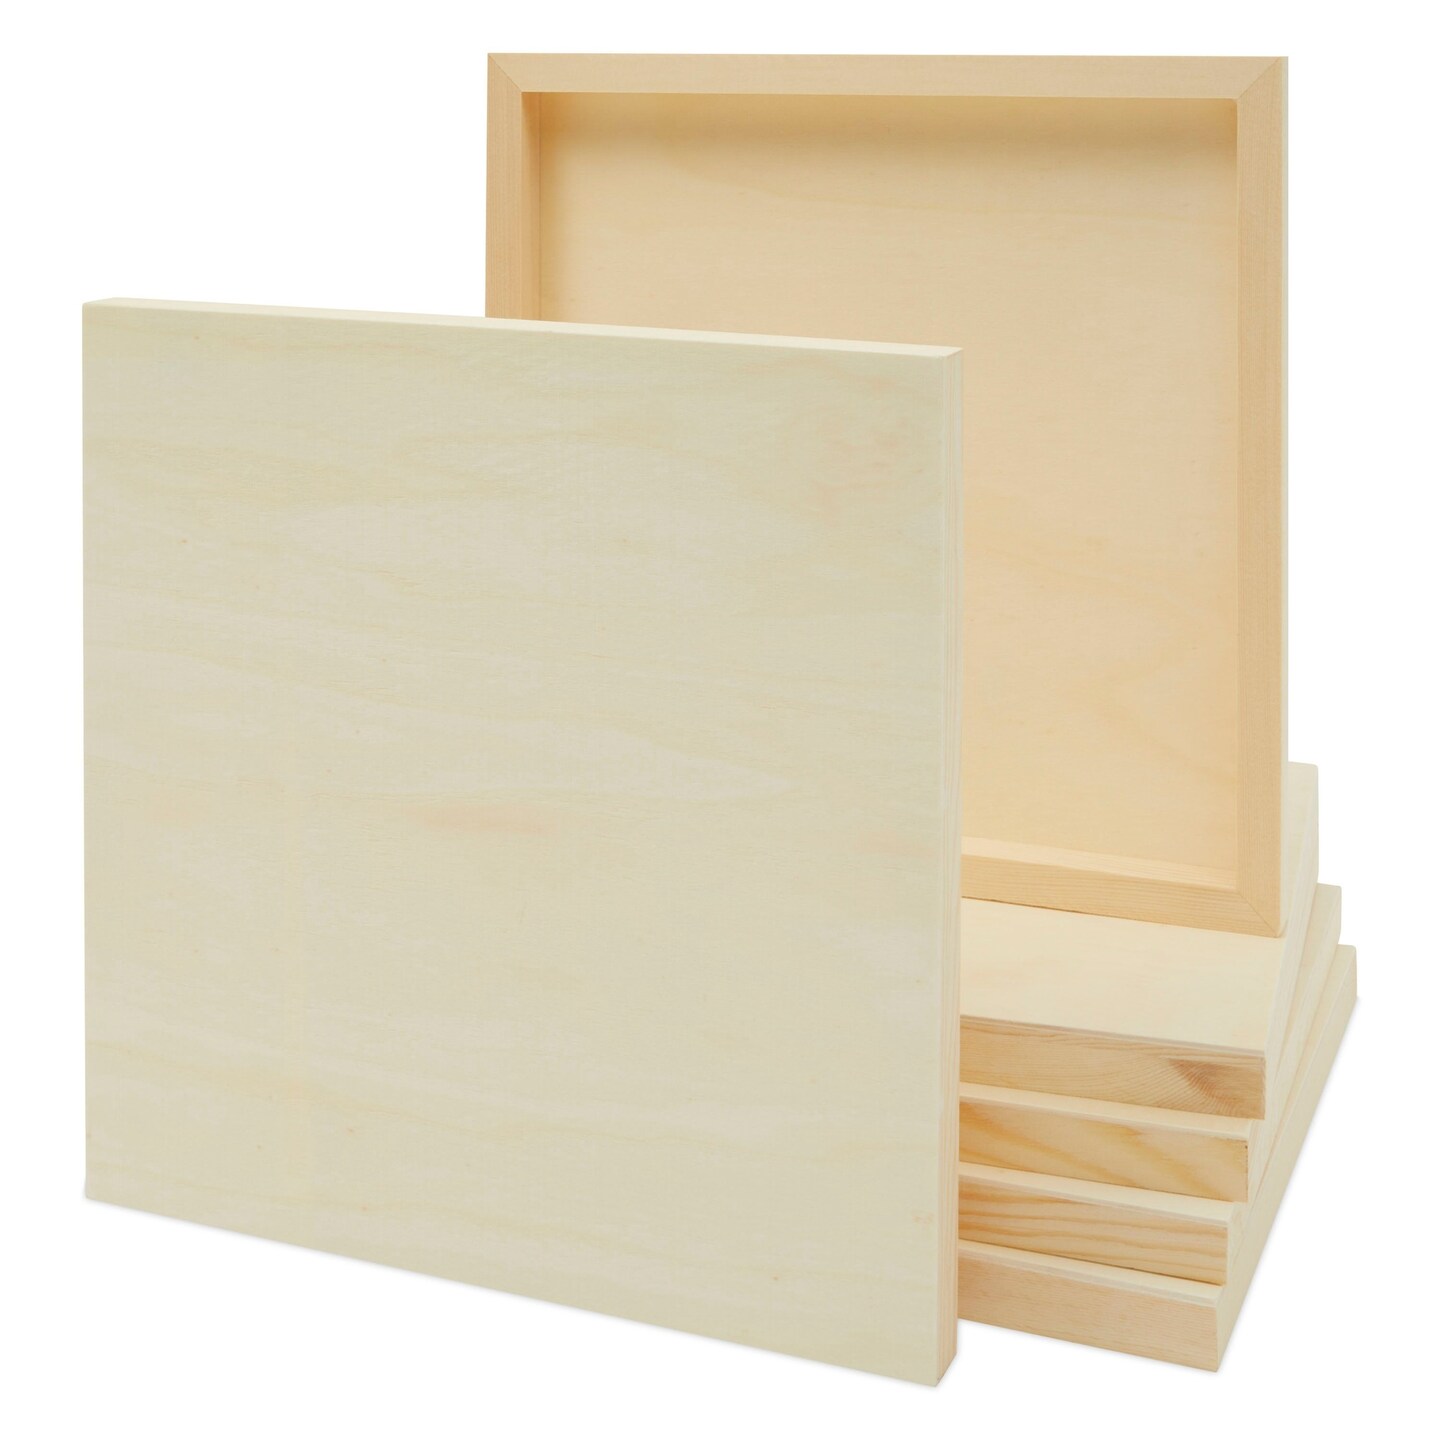 Large Birch Painting Panel 20 x 24 x 1-1/2-Inch, Pack of 10 Wood Canvas Boards for Painting, Blank Signs for Crafts, by Woodpeckers, Size: 20 x 24 x 1